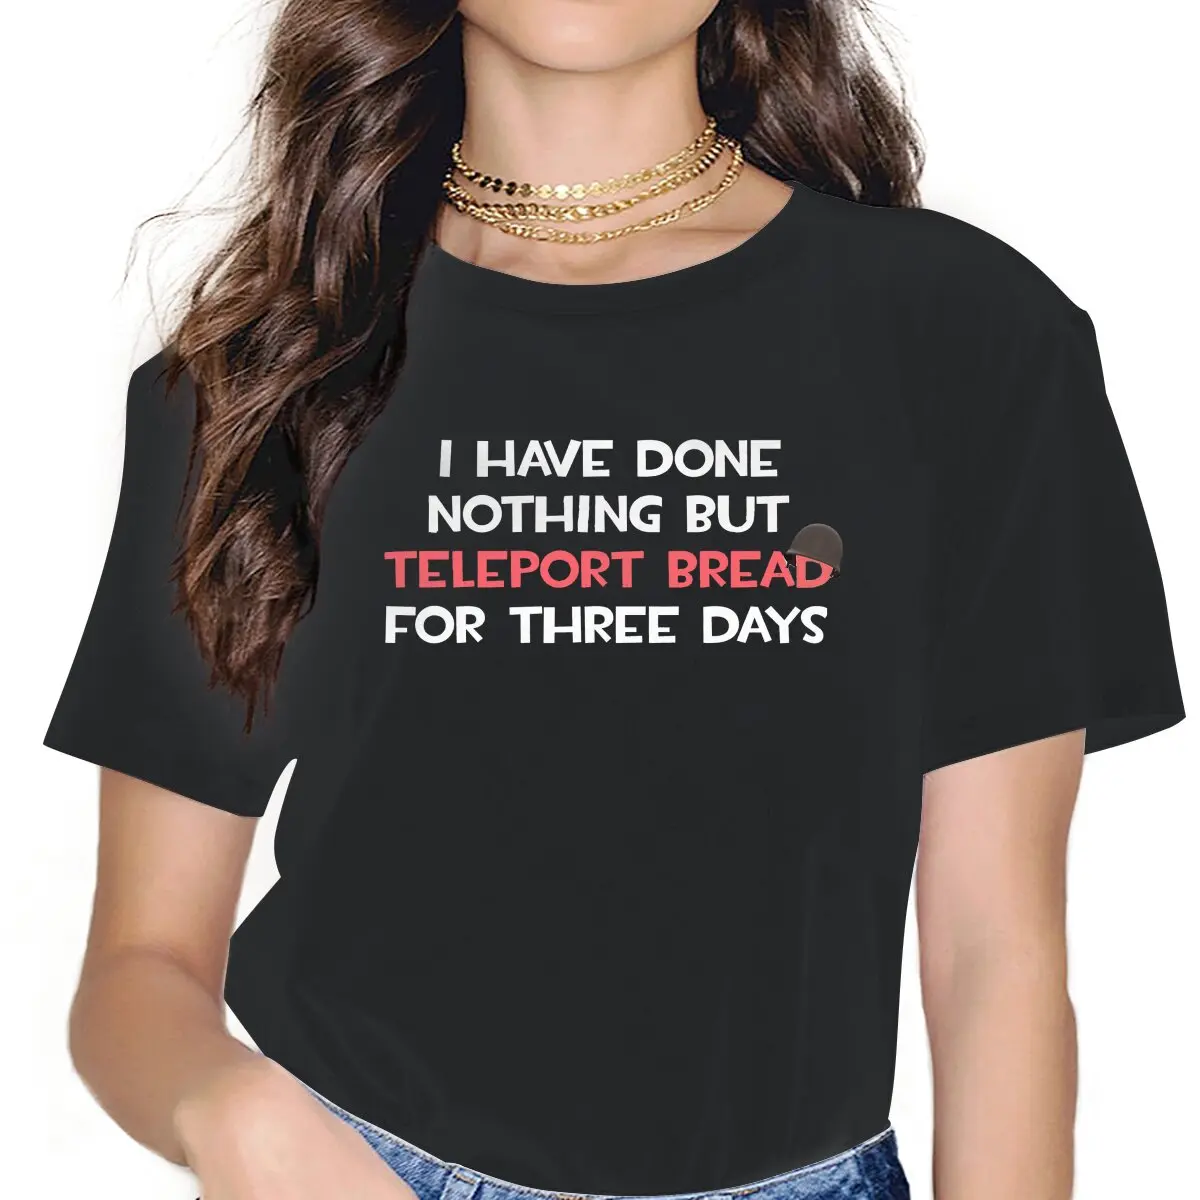 

I Have Done Nothing Women Tshirts Team Fortress 2 Shooter Game Aesthetic Vintage Female Clothing Large Cotton Graphic Tops